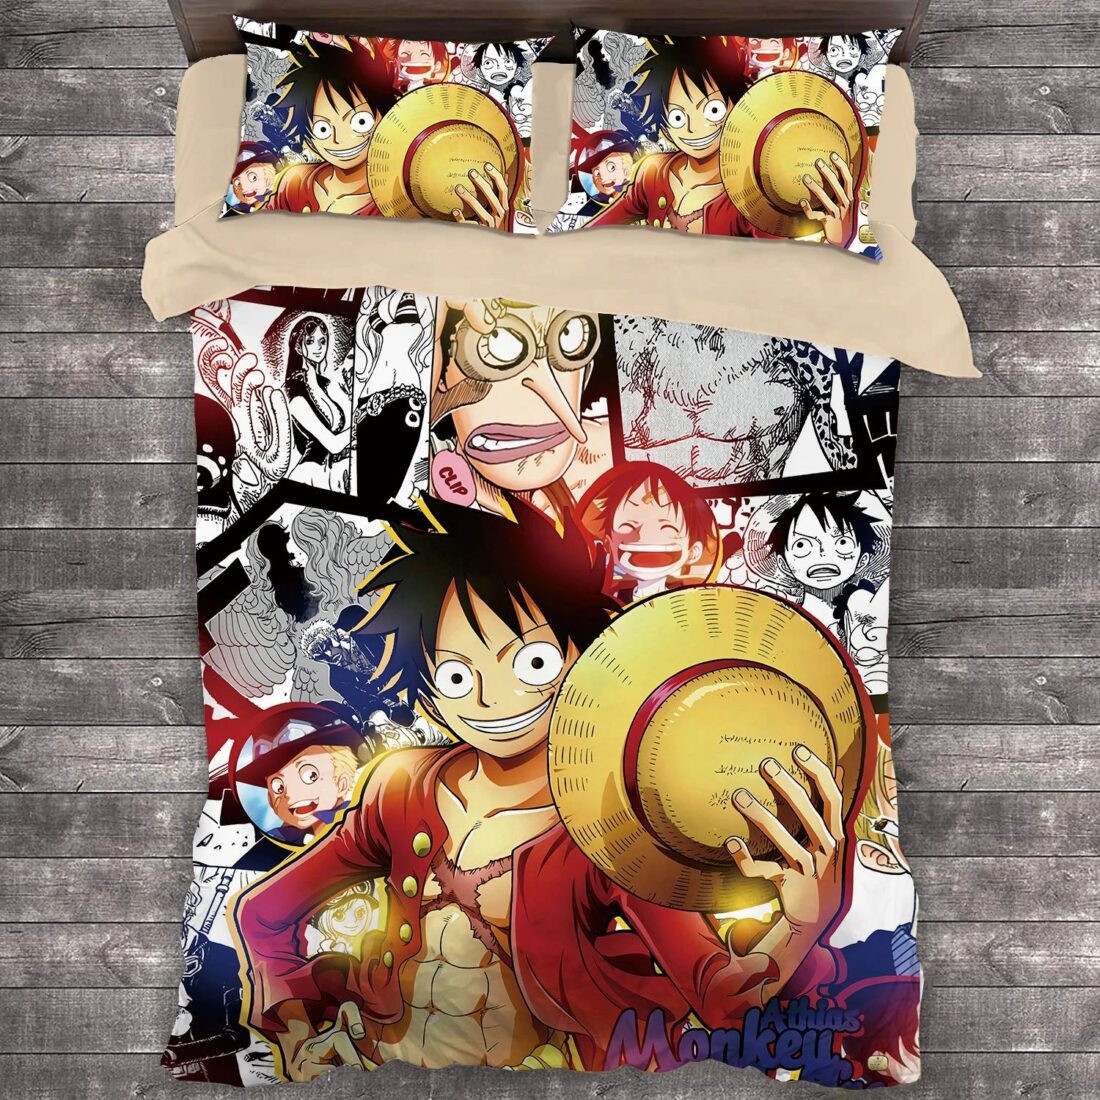 Comic One Piece 2 Luffy and Friends Duvet Cover Set - Bedding Set